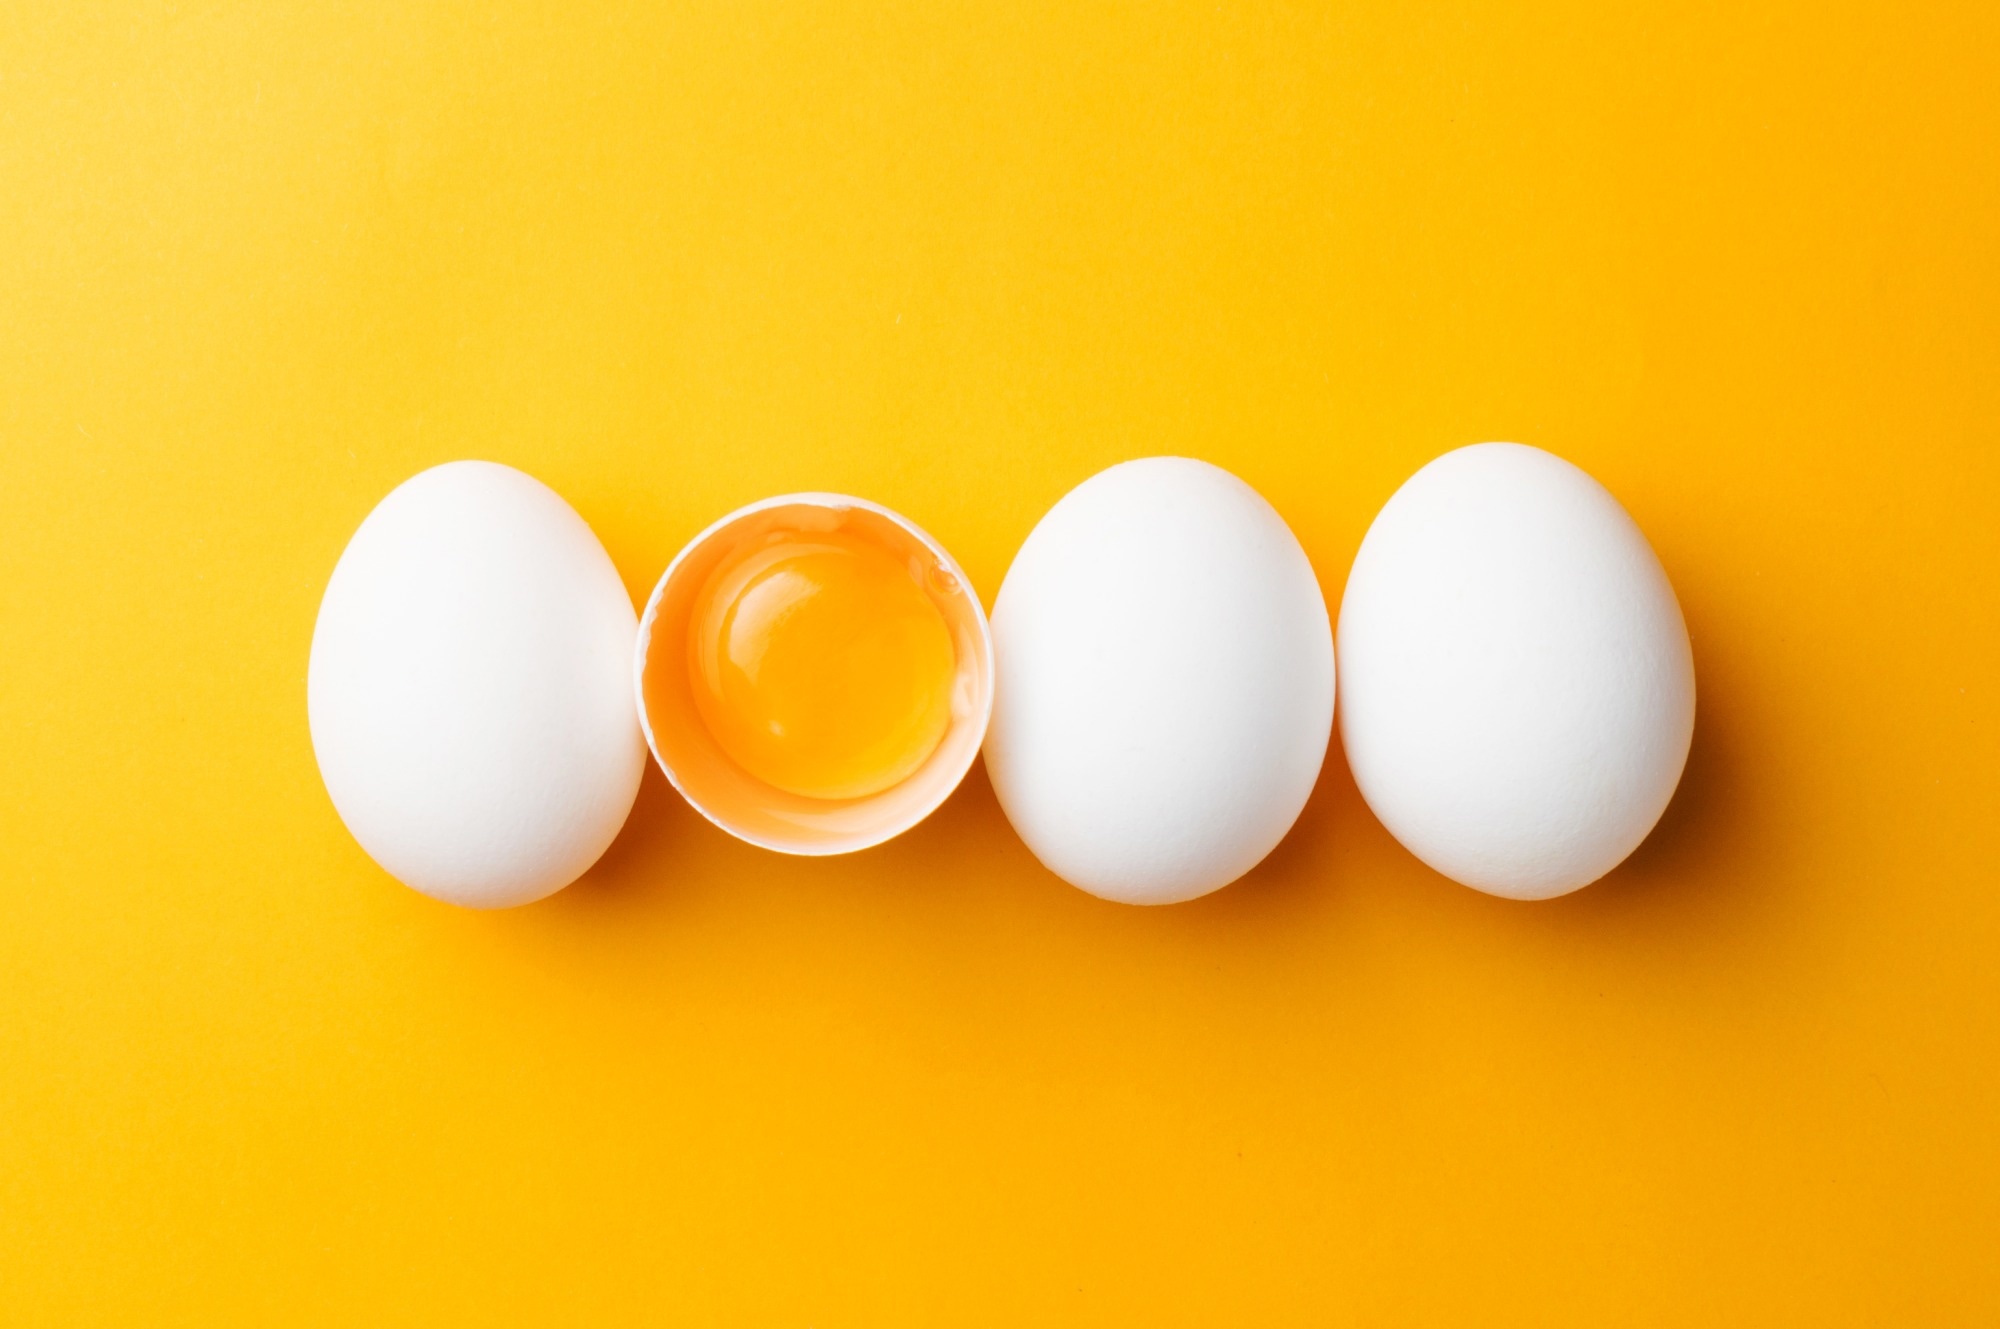 Study: Egg consumption and risk of coronary artery disease, potential amplification by high genetic susceptibility: a prospective cohort study. Image Credit: MasAnyanka / Shutterstock